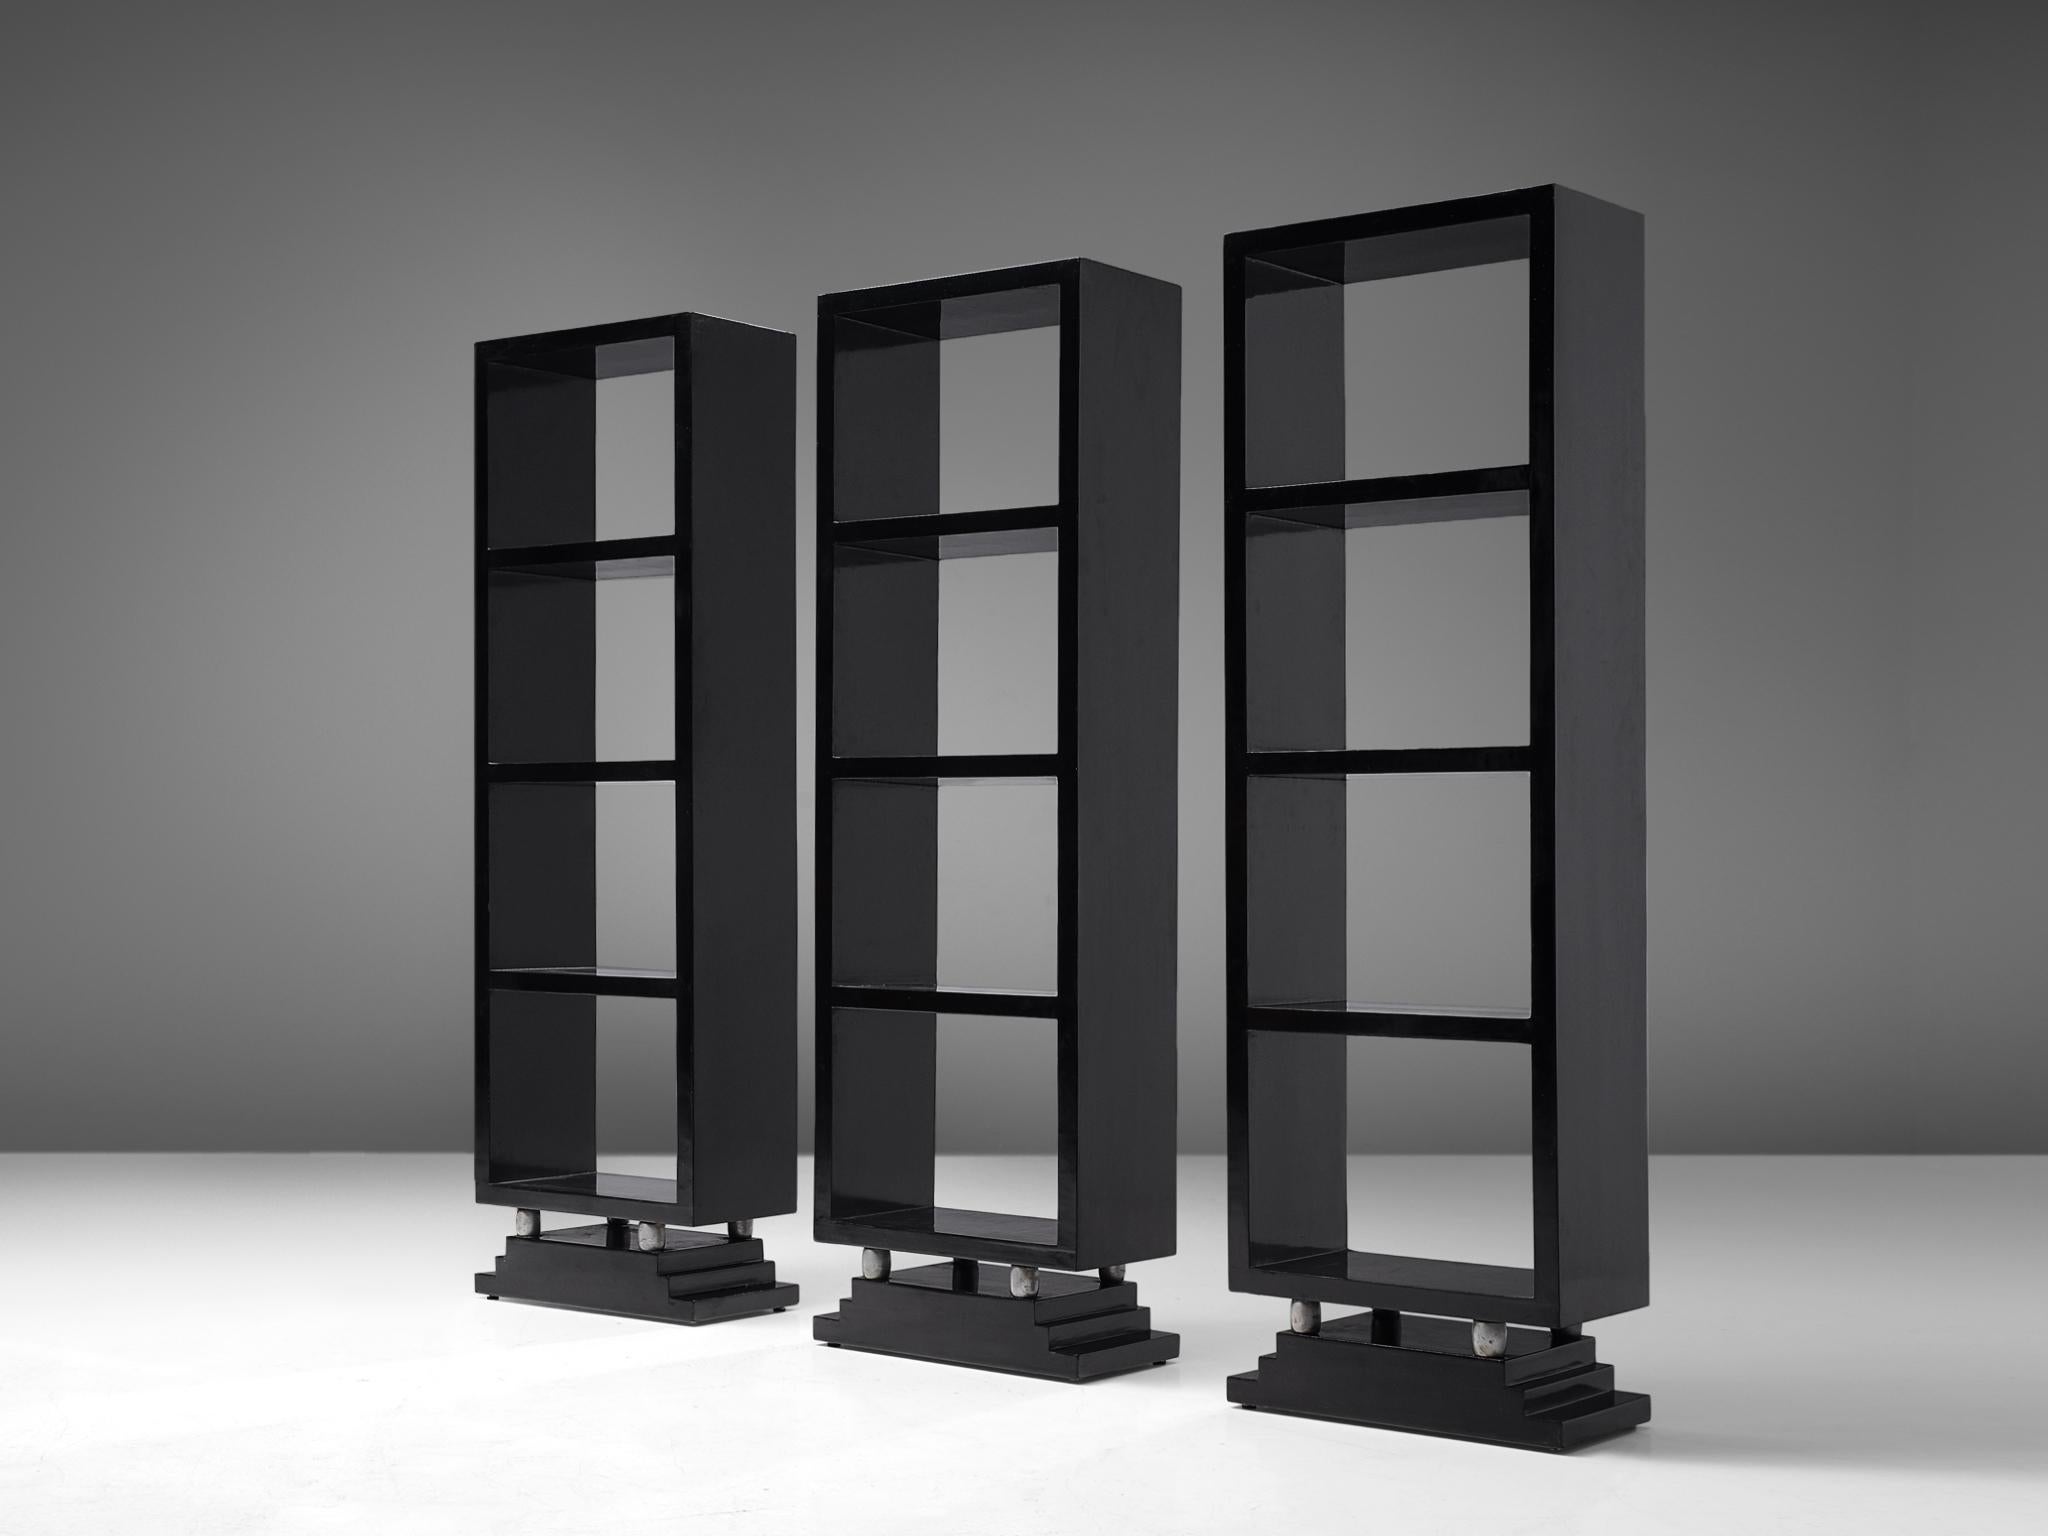 Set of 3 bookcases in the style of Osvaldo Borsani, black lacquered wood and metal, Italy, 1930s.

Elegant black lacquered bookcases, consisting of three narrow elements. With its thick, high gloss lacquered lines the pieces have a graphical